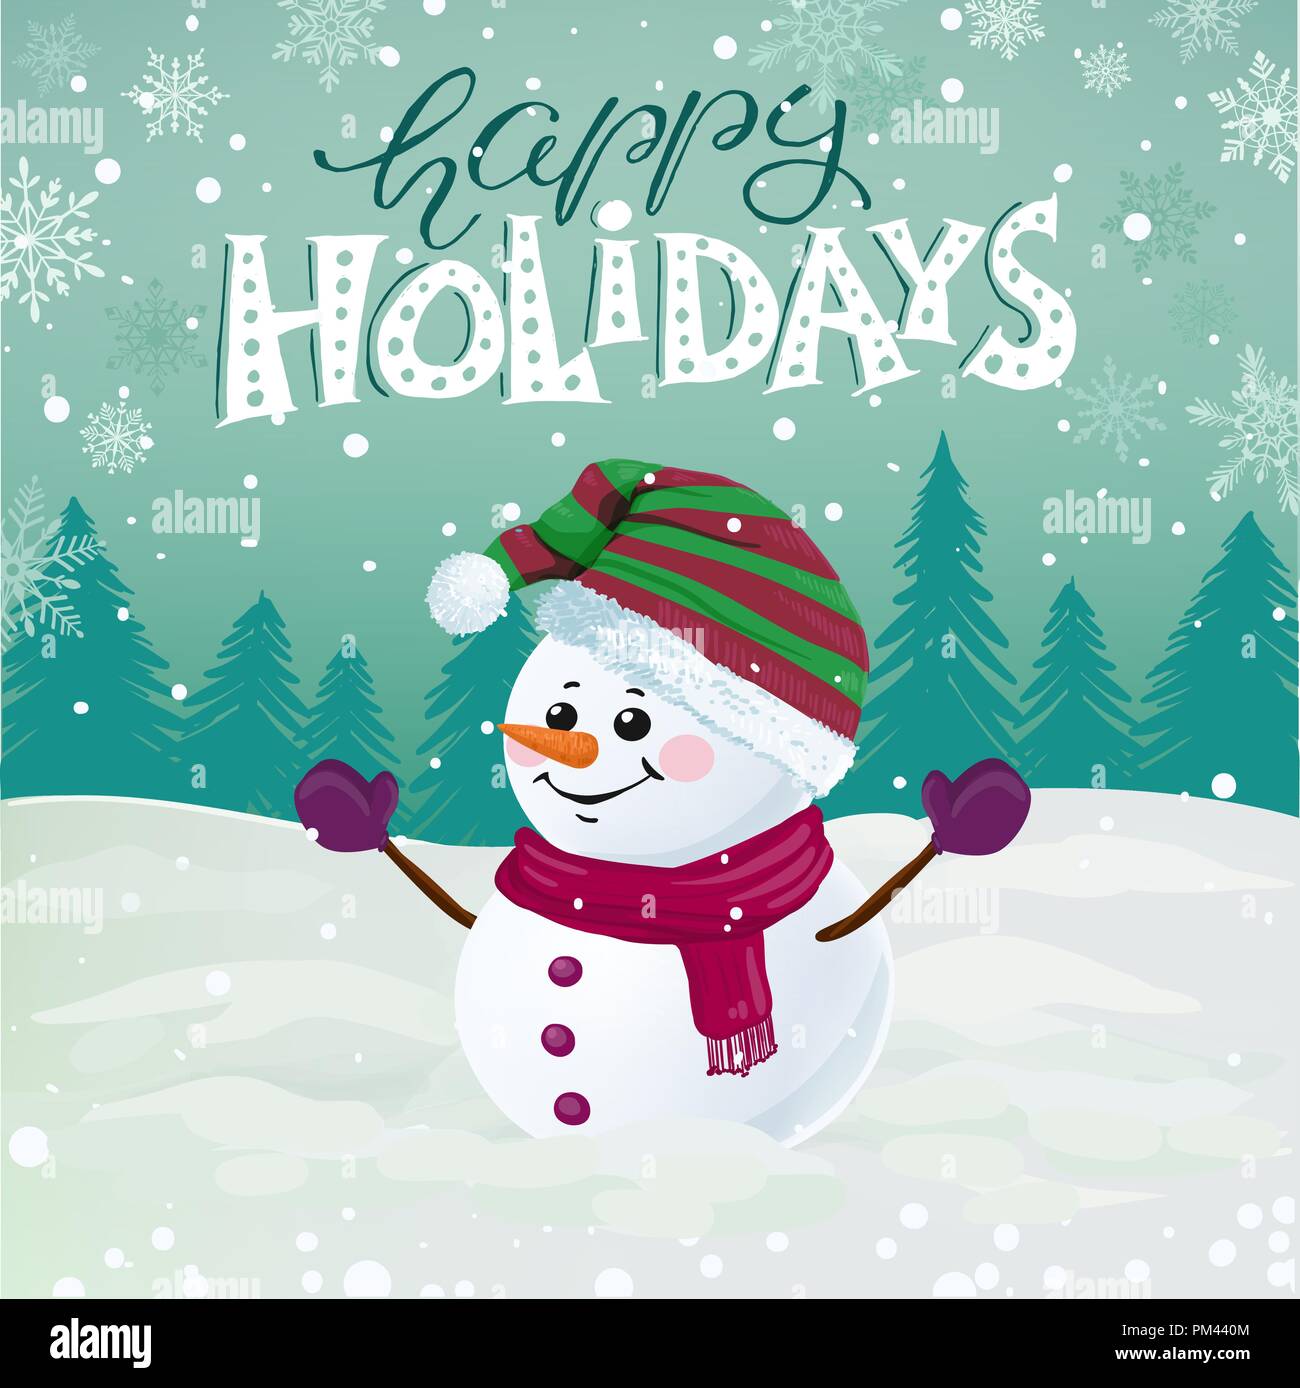 Funny snowman in hat, scarf and mittens on snowy background with holiday lettering.  Happy Holidays vector illustration. Stock Vector